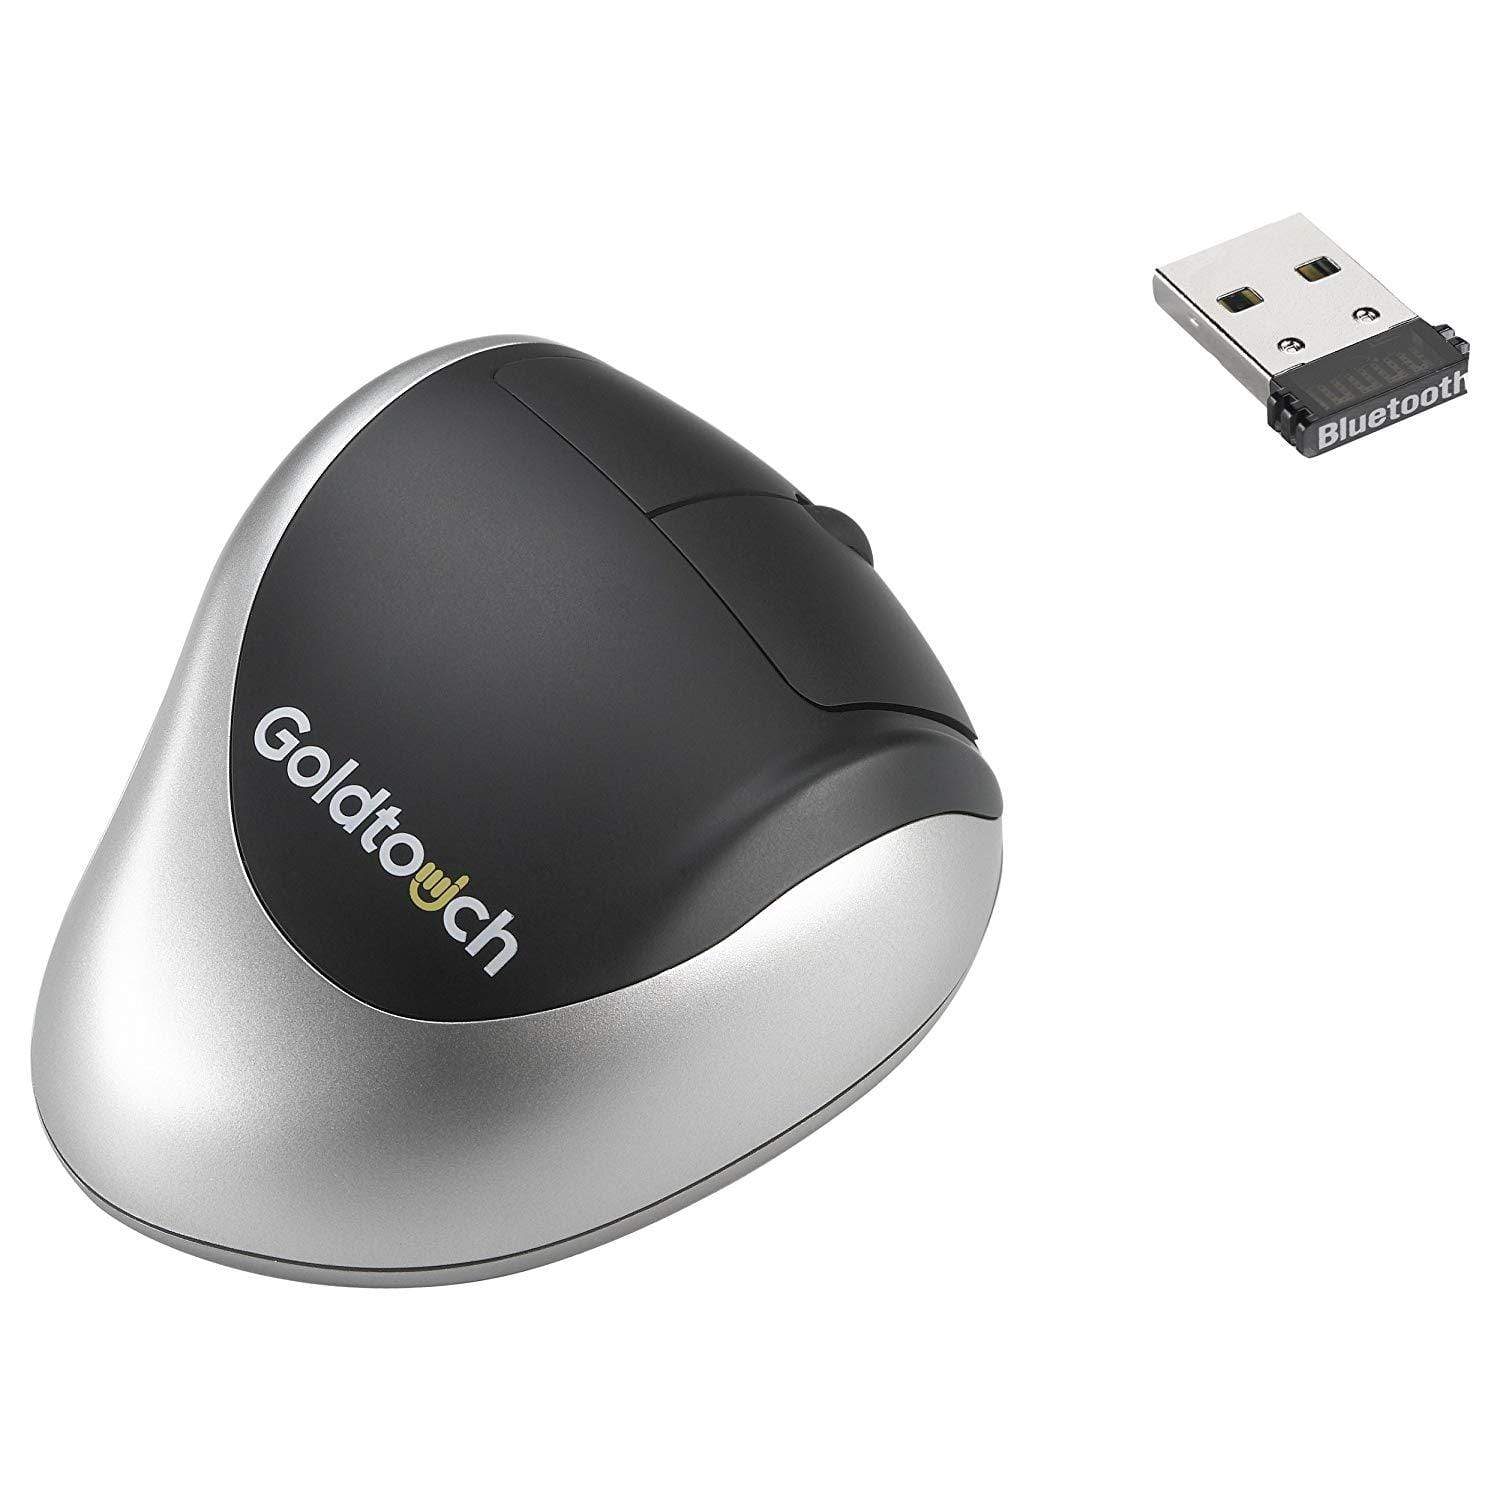 Goldtouch Mouse Goldtouch Bluetooth Comfort Mouse & Dongle Adapter | Right-Handed Only KOV-GTM-BTD